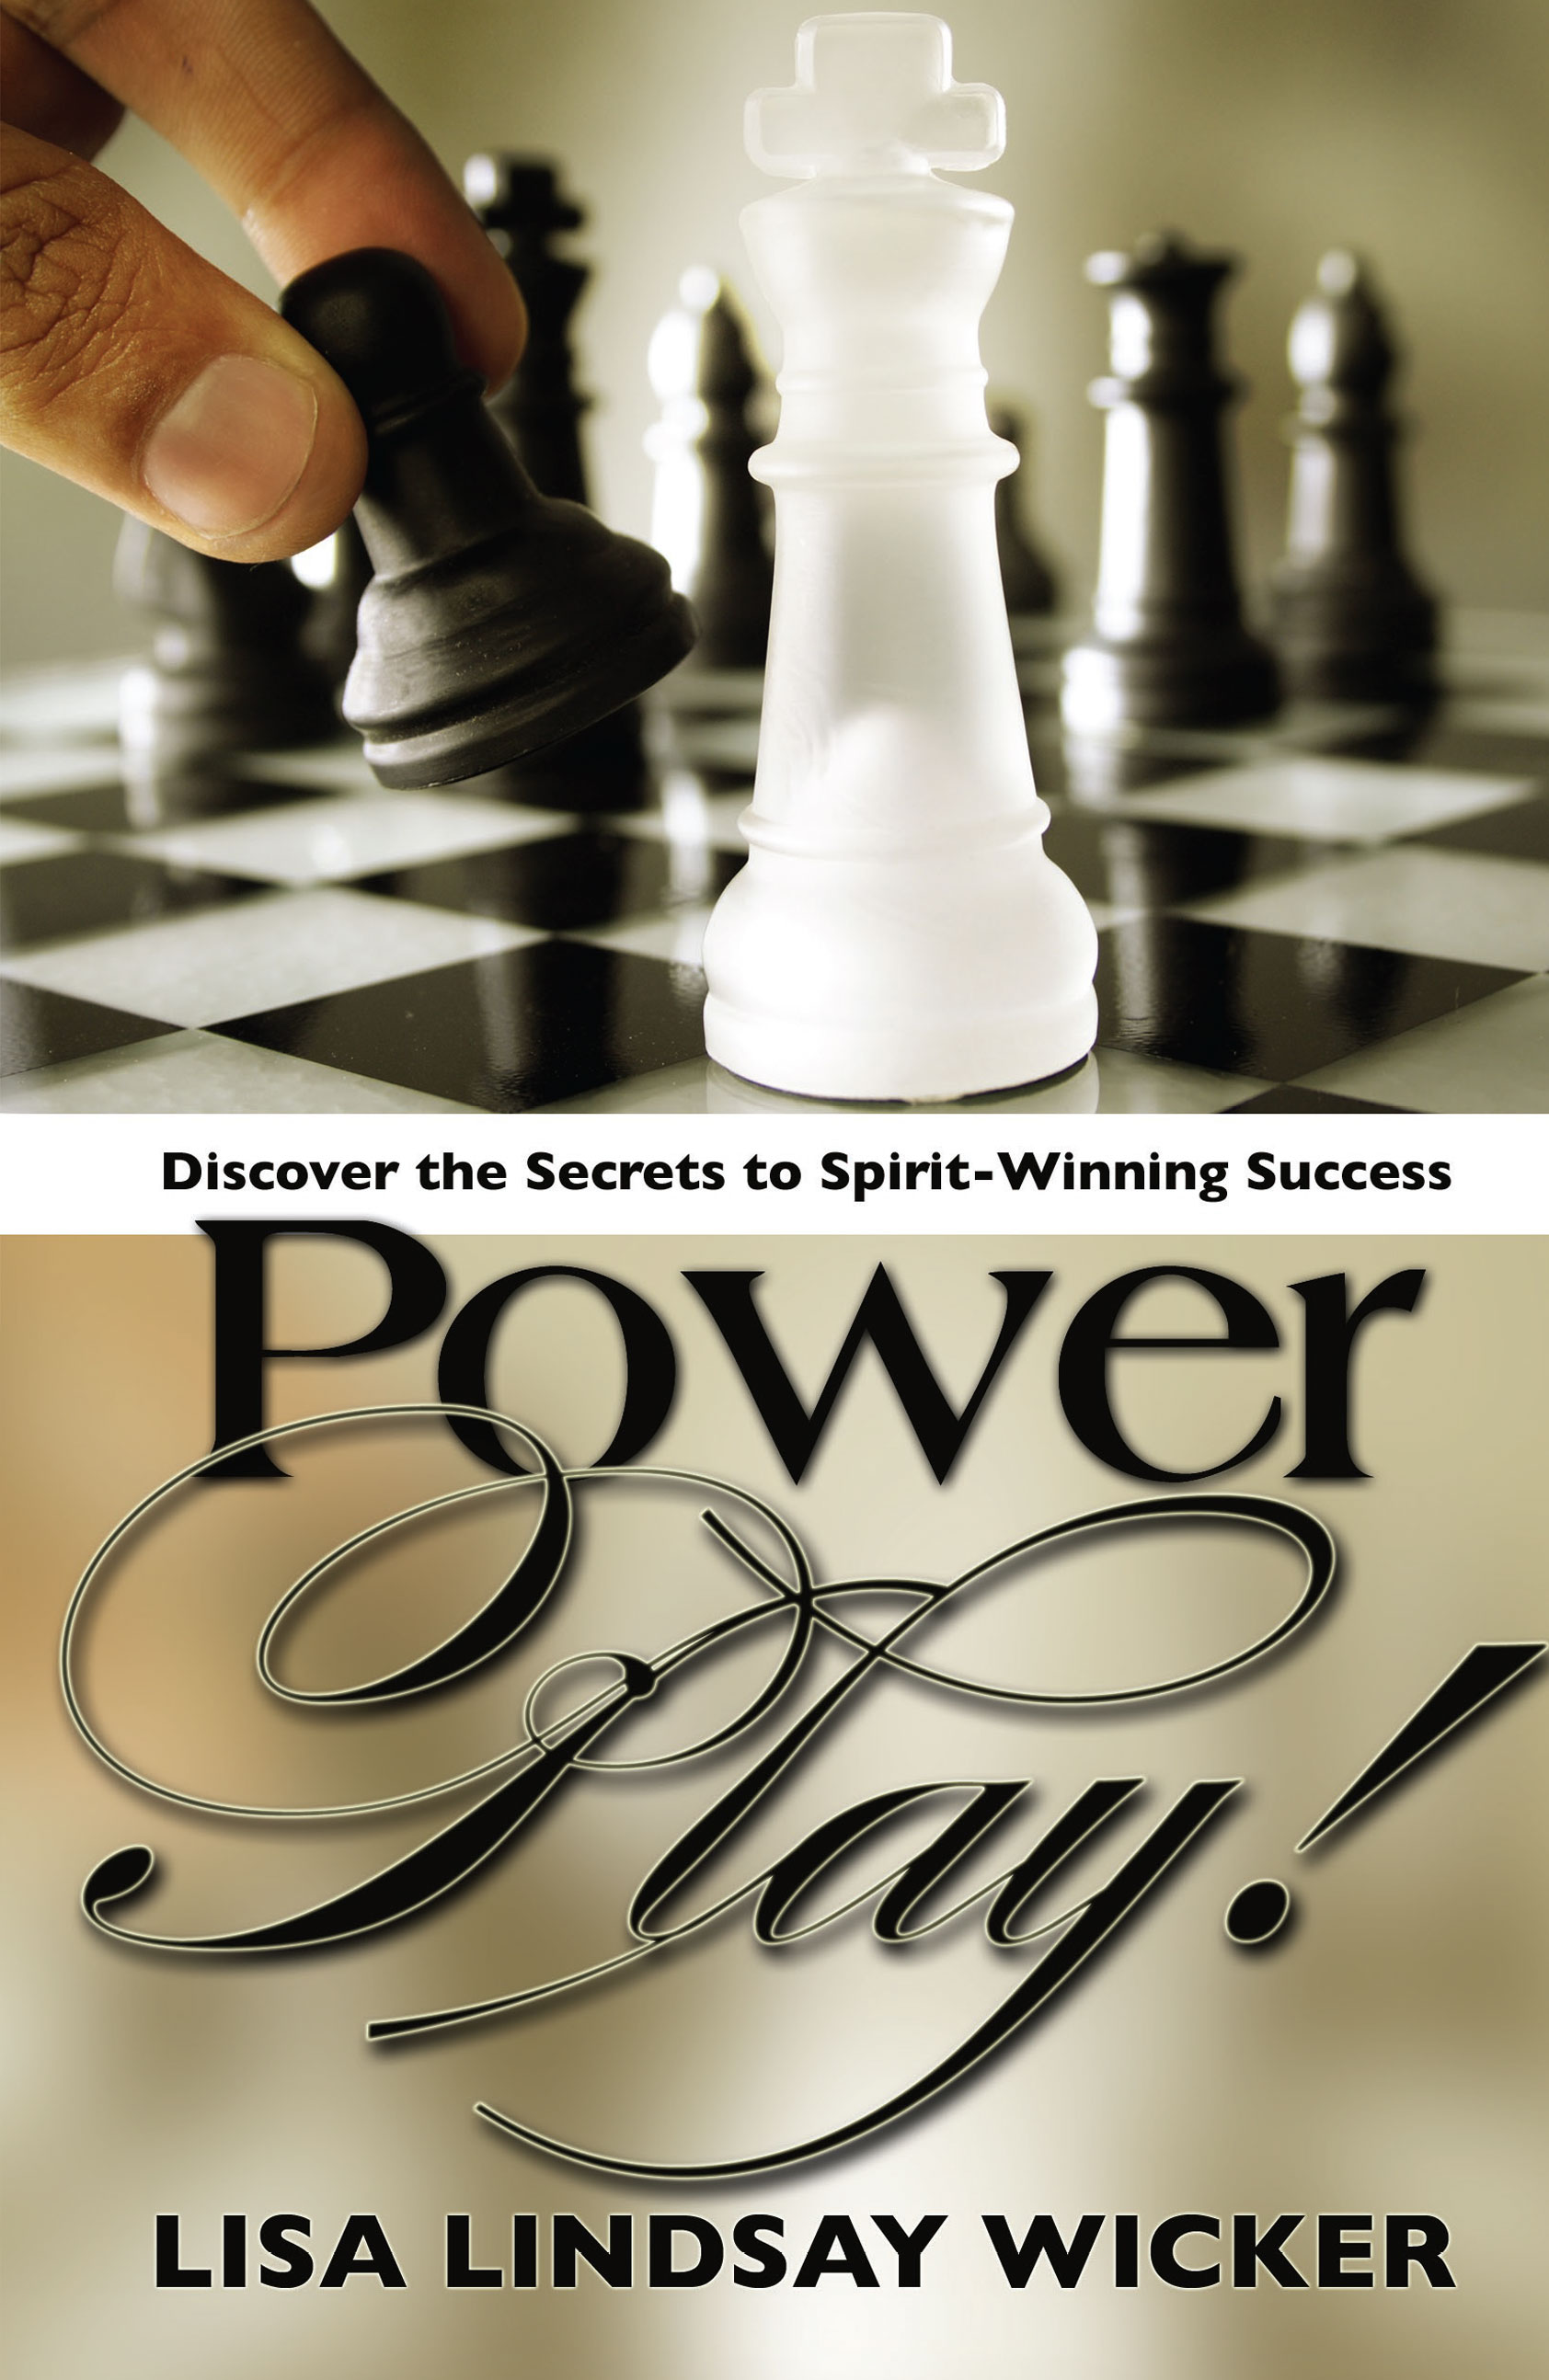 The book of Lisa Lindsay Wicker titled Power Play!